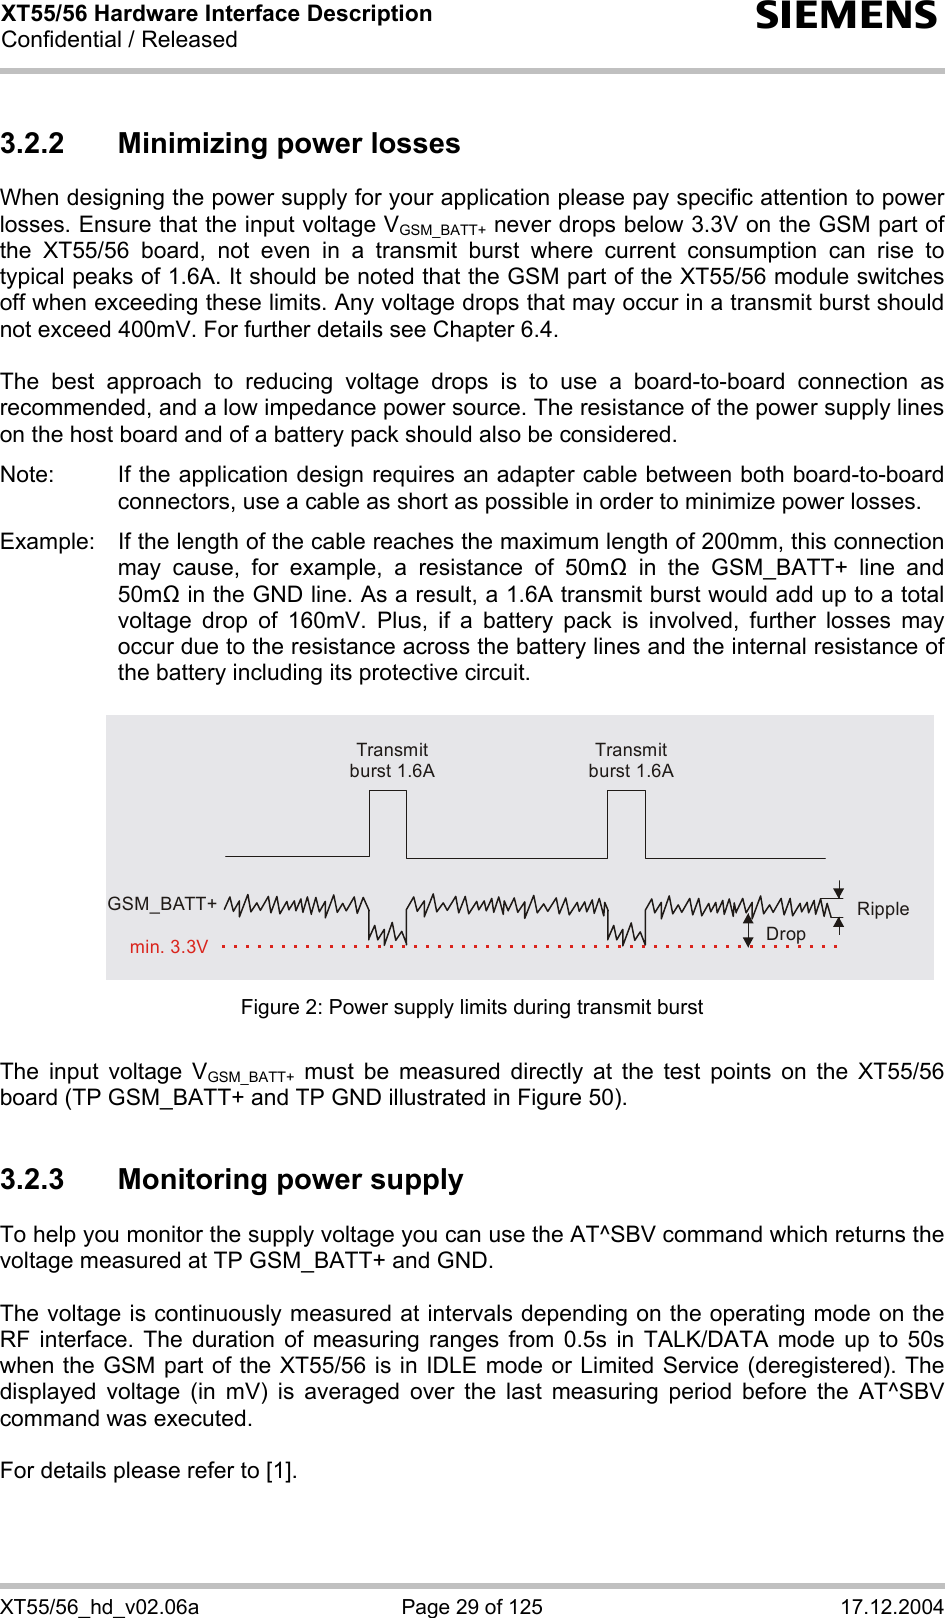 XT55/56 Hardware Interface Description Confidential / Released s XT55/56_hd_v02.06a  Page 29 of 125  17.12.2004 3.2.2  Minimizing power losses When designing the power supply for your application please pay specific attention to power losses. Ensure that the input voltage VGSM_BATT+ never drops below 3.3V on the GSM part of the XT55/56 board, not even in a transmit burst where current consumption can rise to typical peaks of 1.6A. It should be noted that the GSM part of the XT55/56 module switches off when exceeding these limits. Any voltage drops that may occur in a transmit burst should not exceed 400mV. For further details see Chapter 6.4.  The best approach to reducing voltage drops is to use a board-to-board connection as recommended, and a low impedance power source. The resistance of the power supply lines on the host board and of a battery pack should also be considered.  Note:  If the application design requires an adapter cable between both board-to-board connectors, use a cable as short as possible in order to minimize power losses.   Example:  If the length of the cable reaches the maximum length of 200mm, this connection may cause, for example, a resistance of 50m in the GSM_BATT+ line and 50m in the GND line. As a result, a 1.6A transmit burst would add up to a total voltage drop of 160mV. Plus, if a battery pack is involved, further losses may occur due to the resistance across the battery lines and the internal resistance of the battery including its protective circuit.    Transmit burst 1.6ATransmit burst 1.6ARippleDropmin. 3.3VGSM_BATT+ Figure 2: Power supply limits during transmit burst  The input voltage VGSM_BATT+ must be measured directly at the test points on the XT55/56 board (TP GSM_BATT+ and TP GND illustrated in Figure 50).  3.2.3  Monitoring power supply To help you monitor the supply voltage you can use the AT^SBV command which returns the voltage measured at TP GSM_BATT+ and GND.   The voltage is continuously measured at intervals depending on the operating mode on the RF interface. The duration of measuring ranges from 0.5s in TALK/DATA mode up to 50s when the GSM part of the XT55/56 is in IDLE mode or Limited Service (deregistered). The displayed voltage (in mV) is averaged over the last measuring period before the AT^SBV command was executed.   For details please refer to [1].  